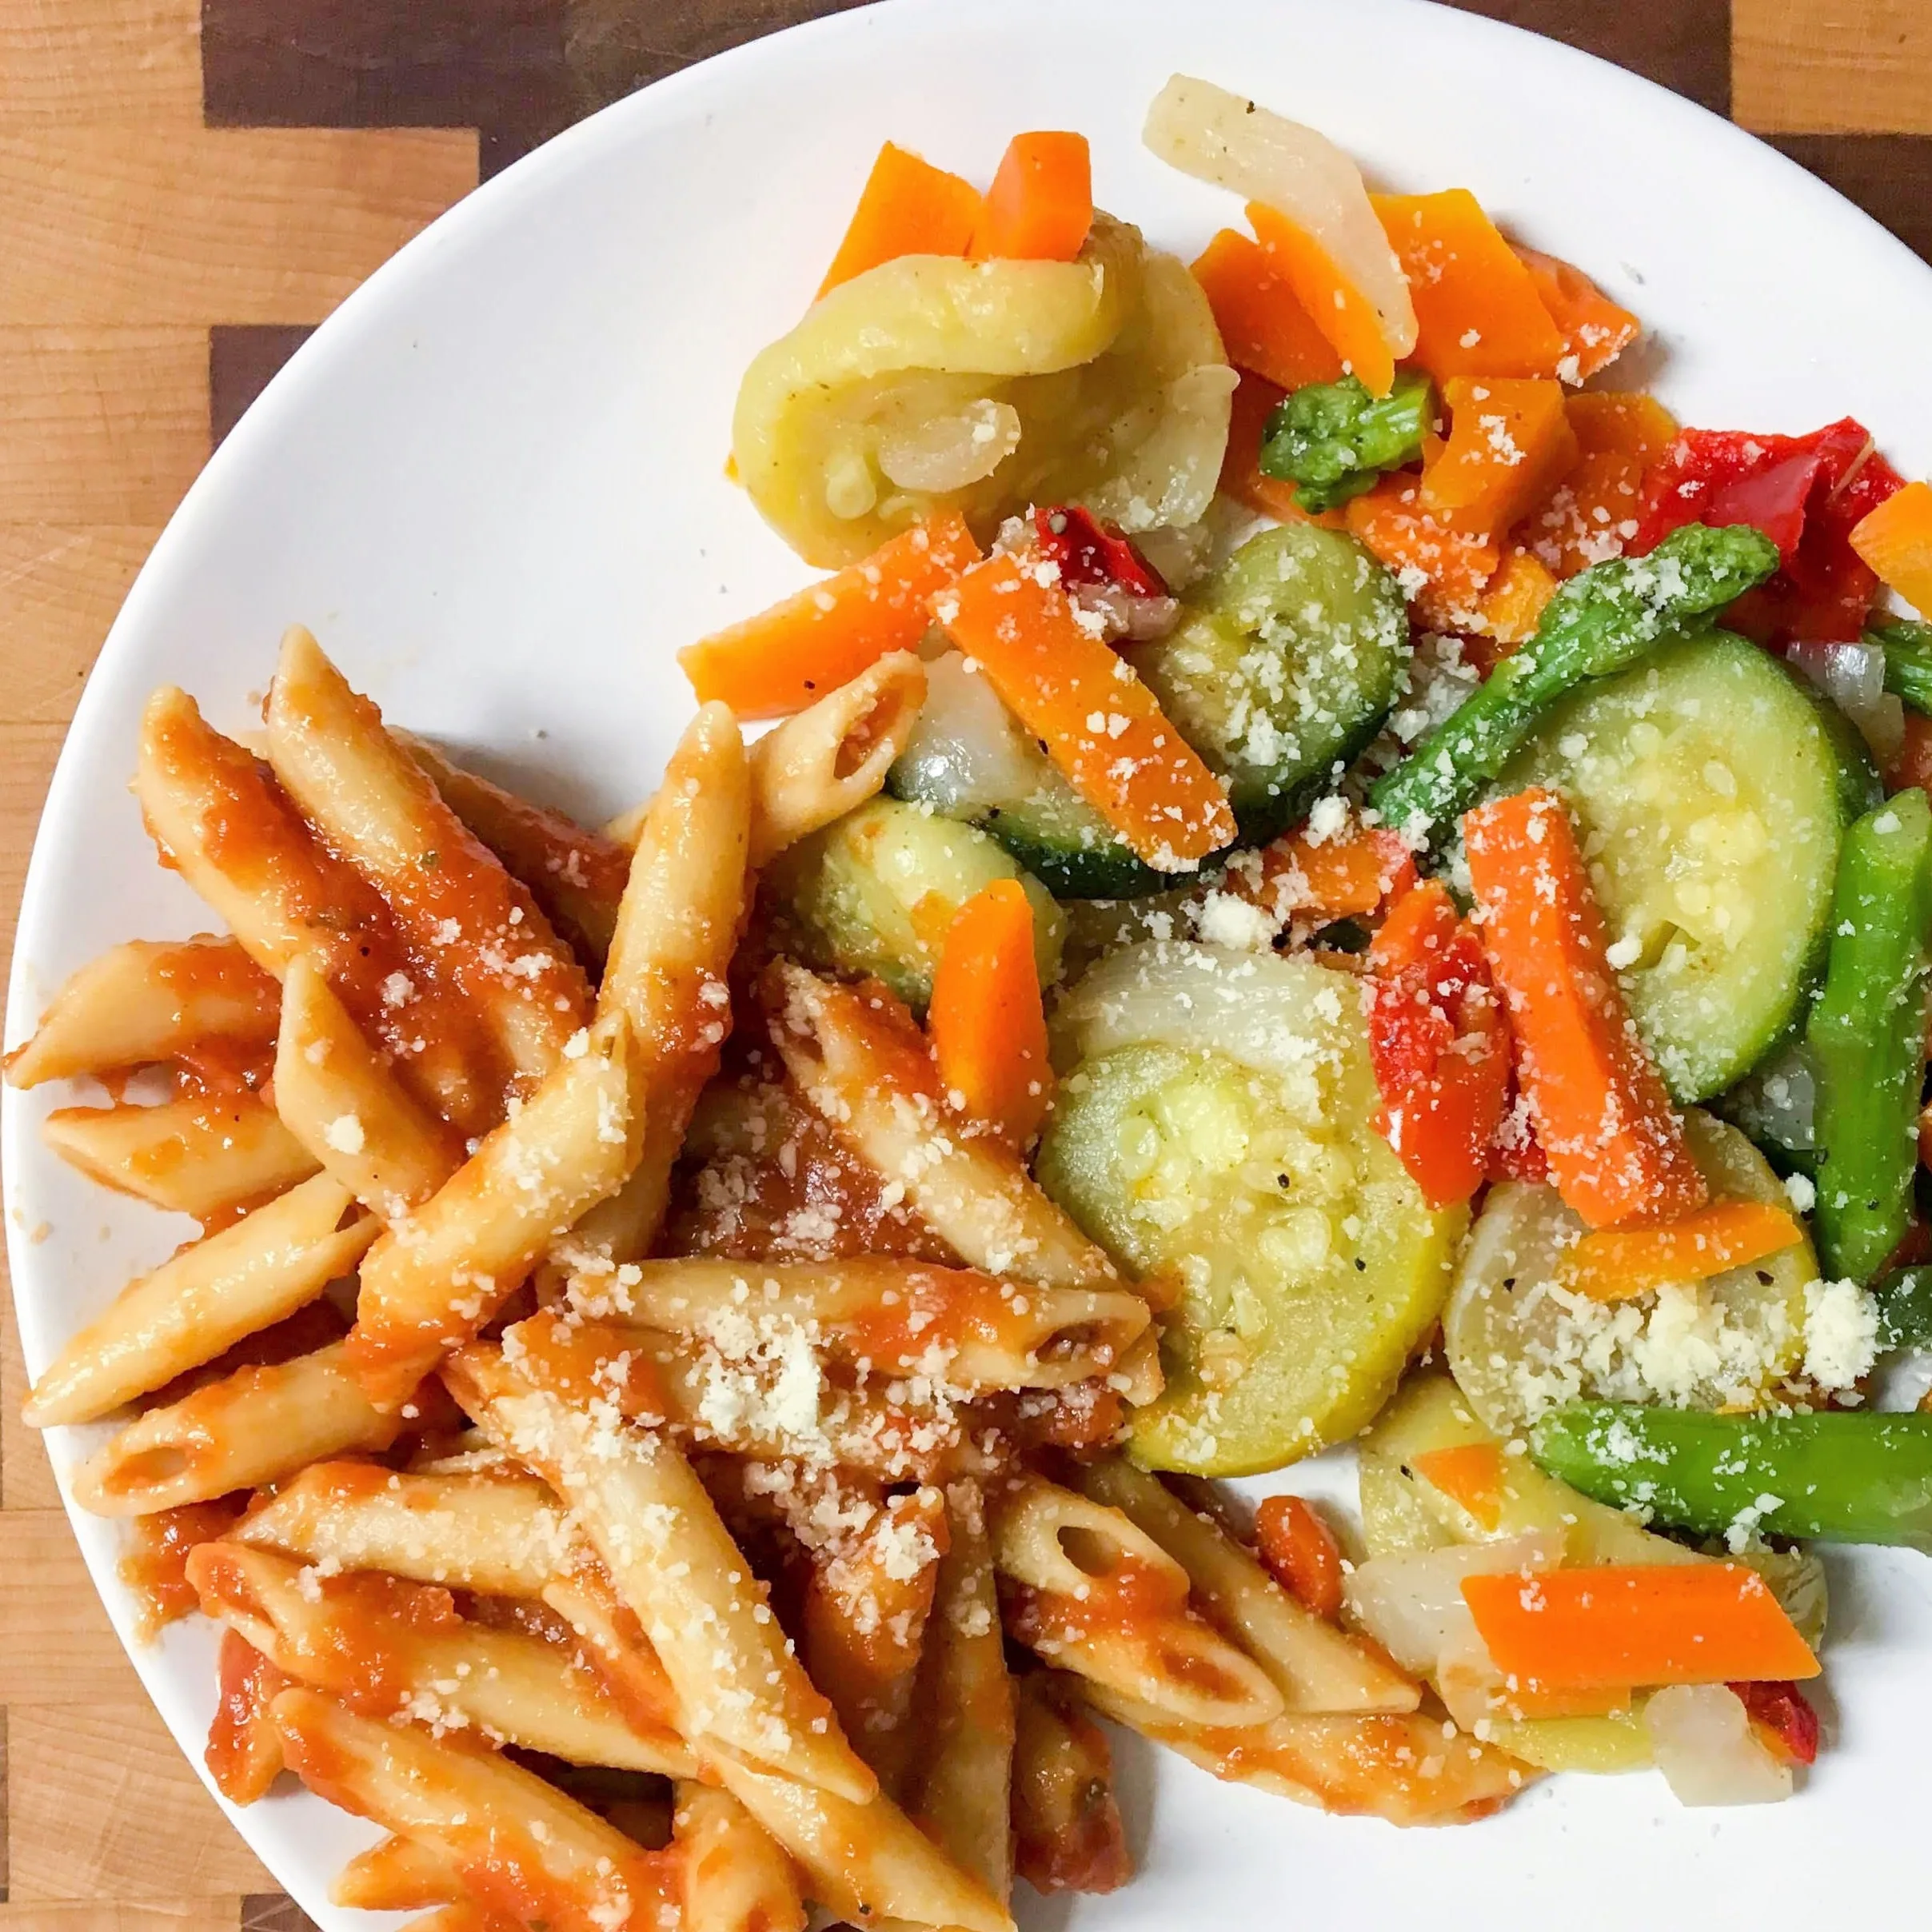 Banza Pasta with Vegetables